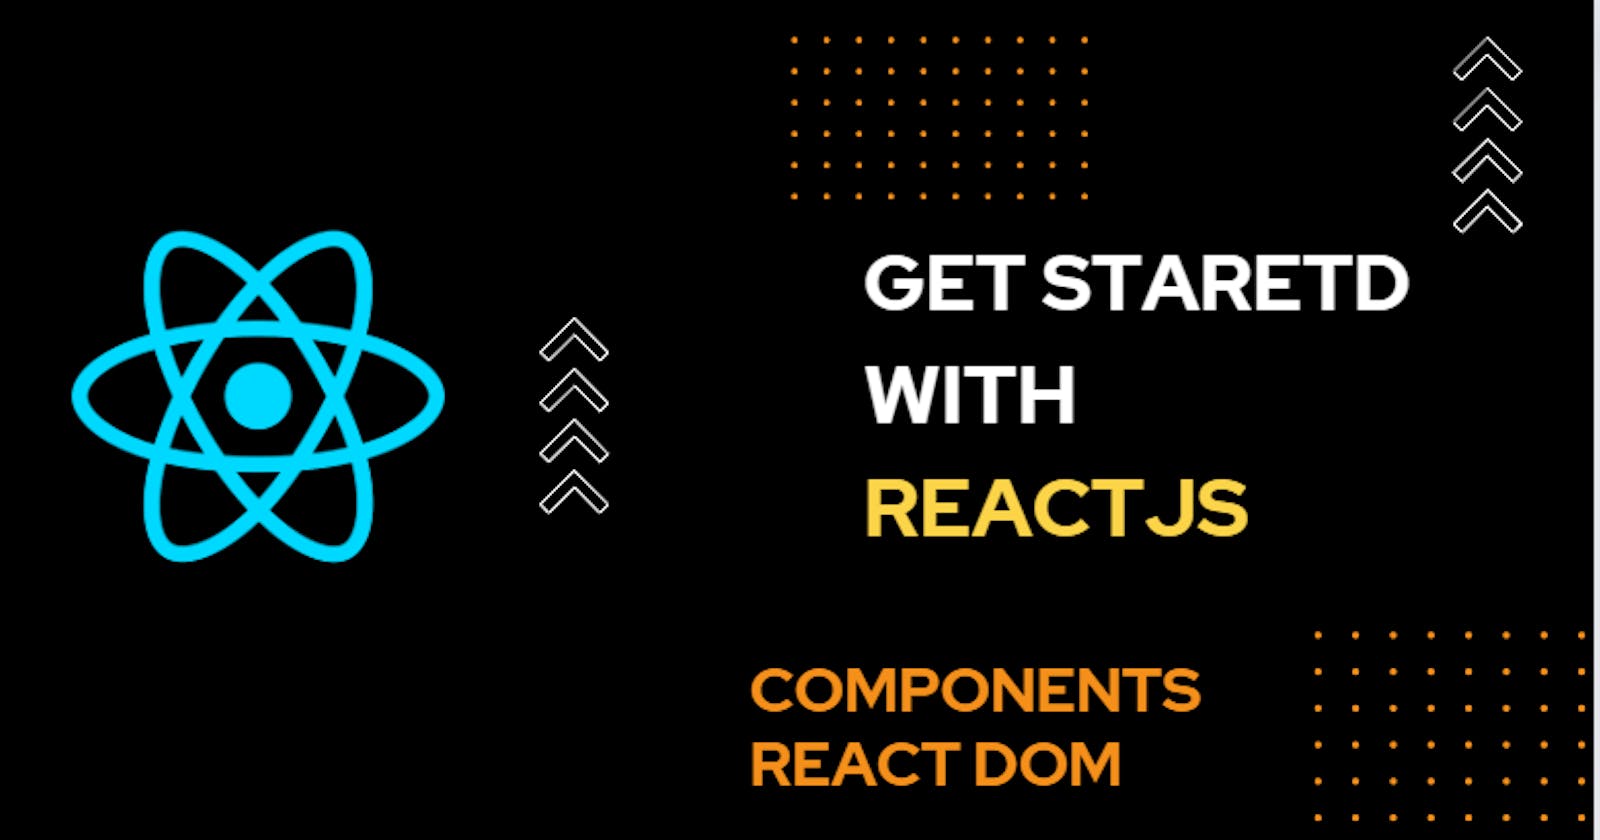 Getting started with ReactJS